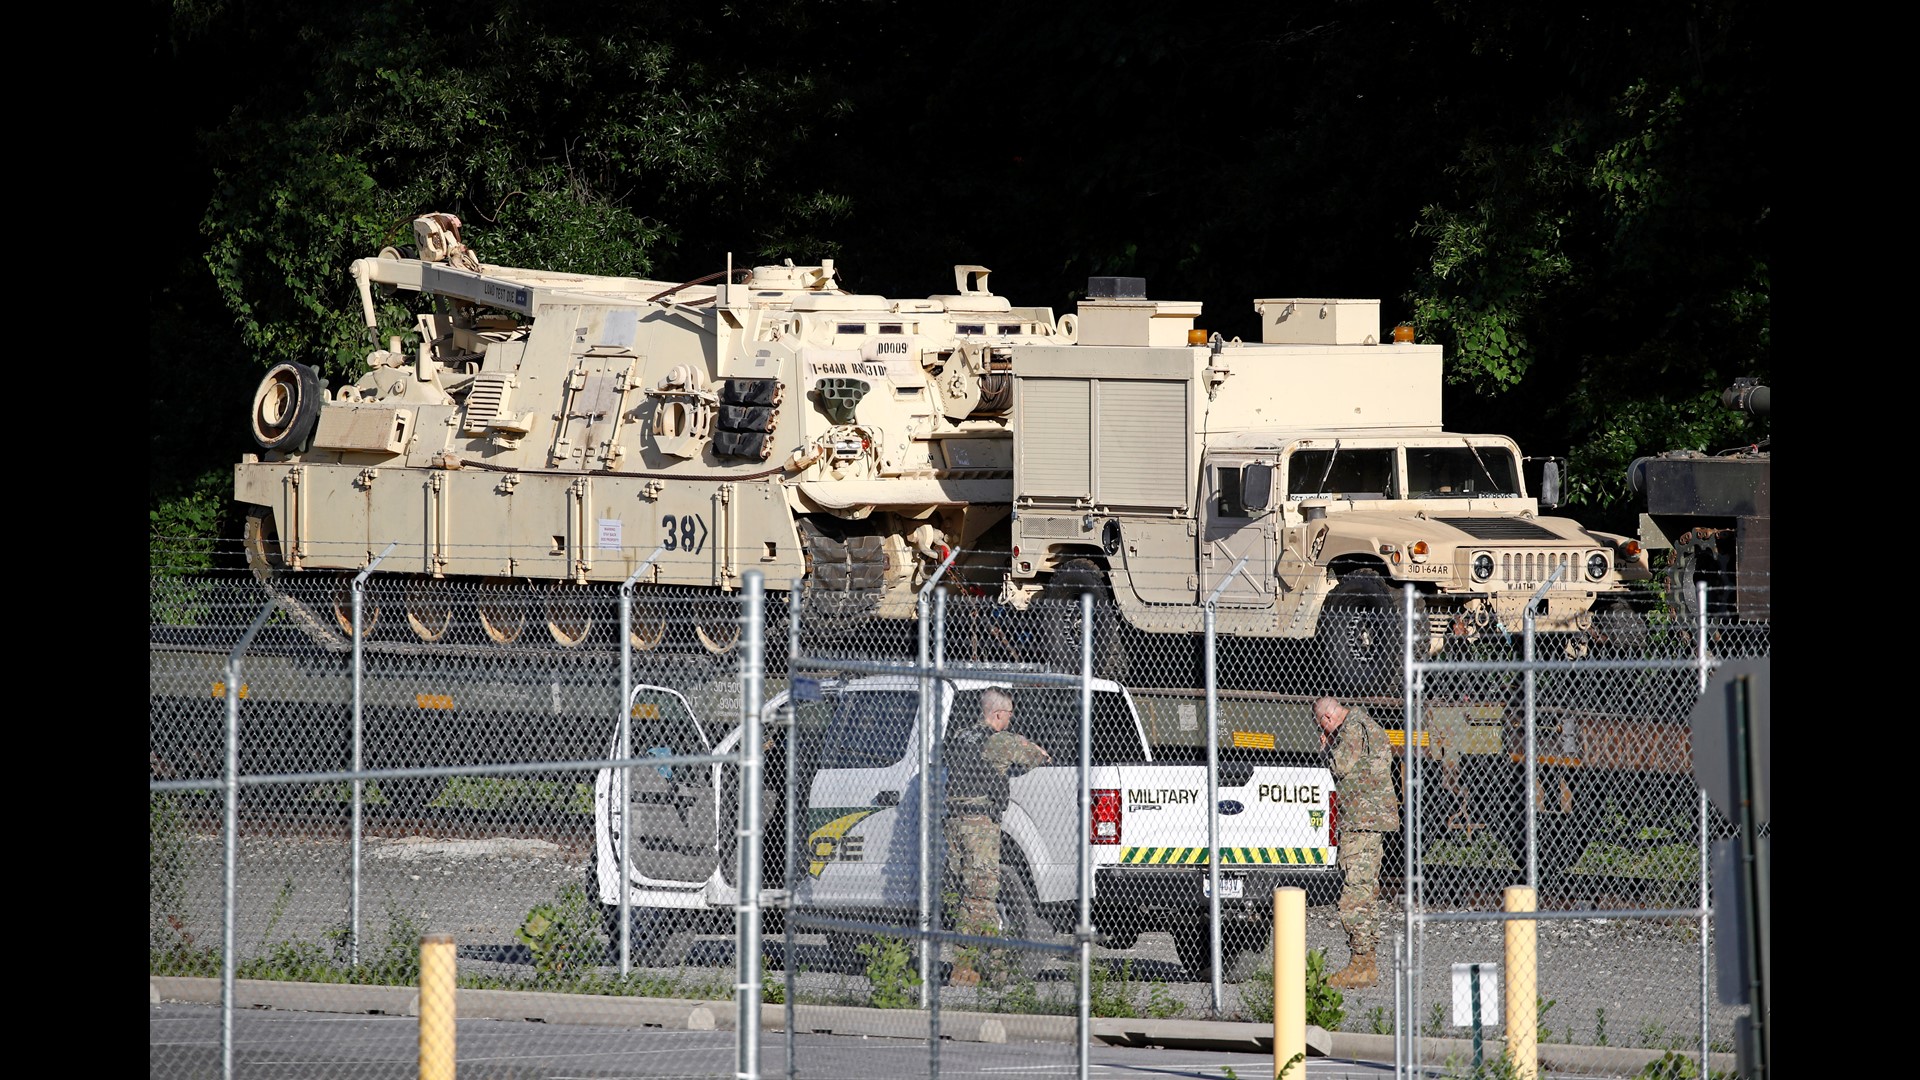 The President says tanks will be part of the Fourth of July celebration. At least two of them are already in DC and were spotted them parked in a Southeast DC rail yard. A military official says they were transported from Fort Stewart in Georgia. We don't know if these tanks are going to be used in the celebration on Thursday.